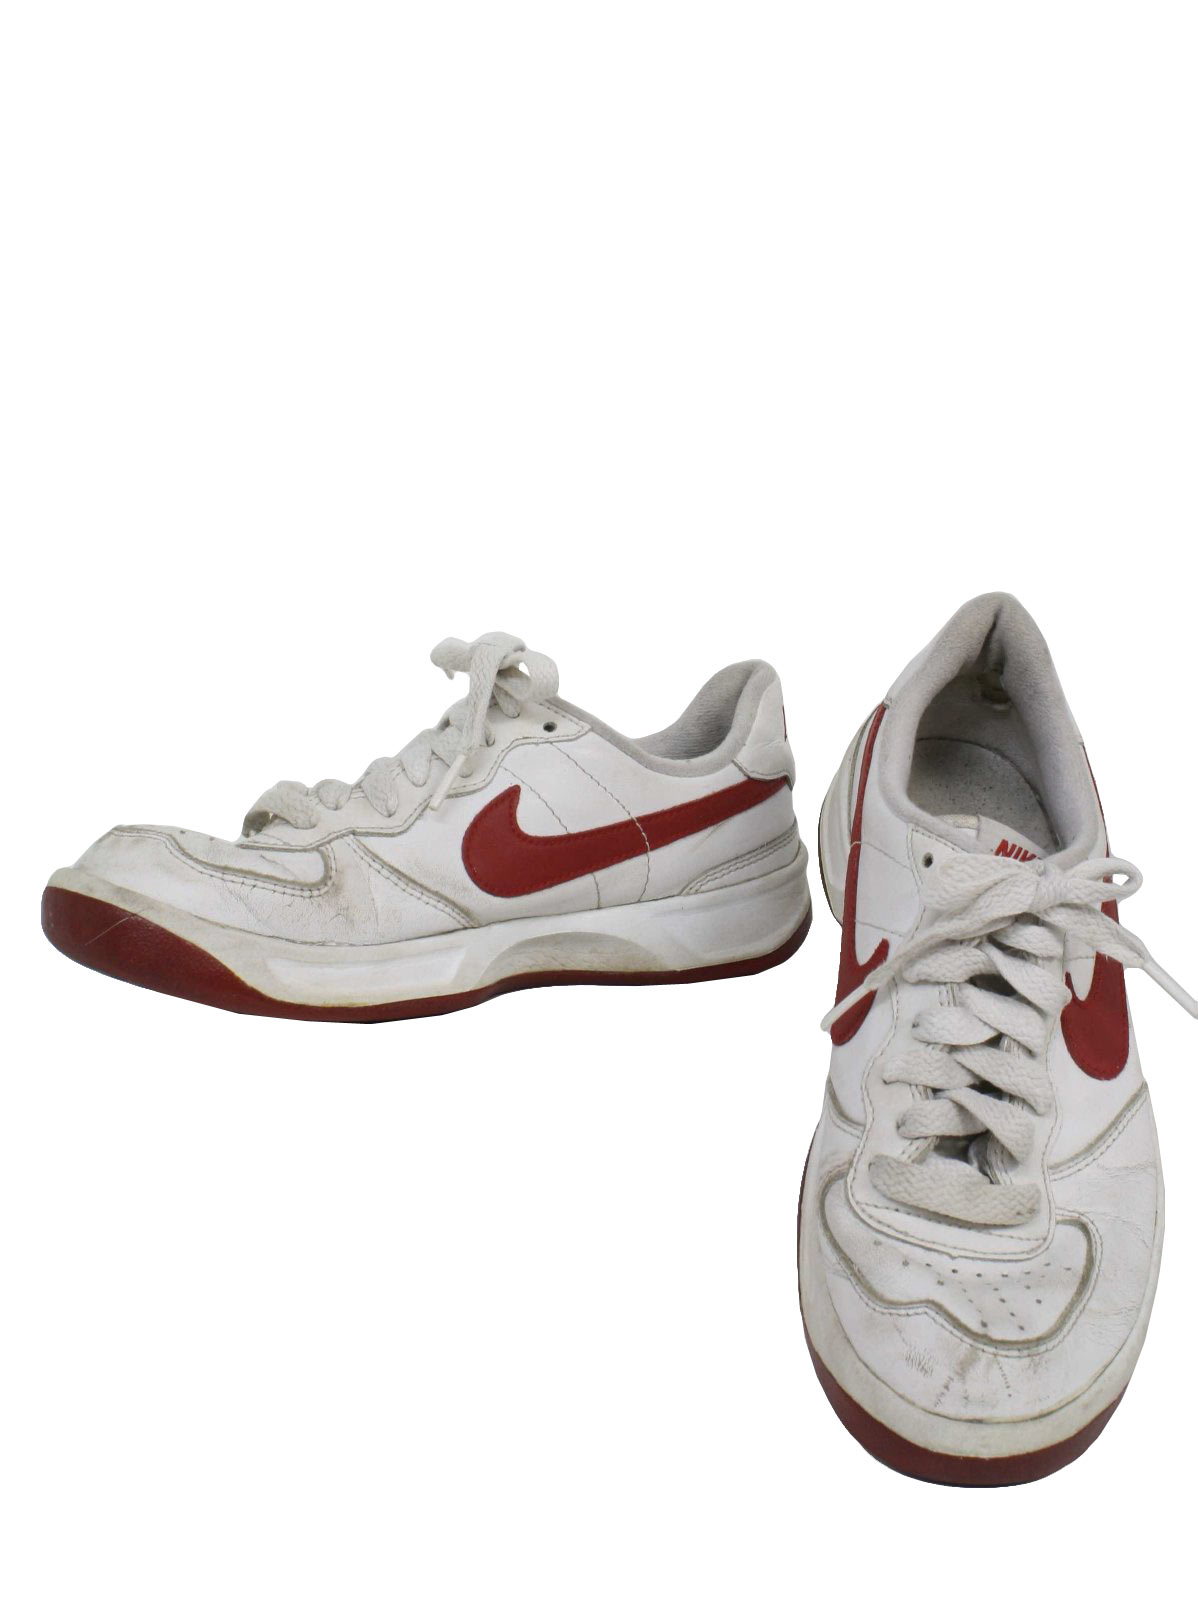 old school nike mens shoes